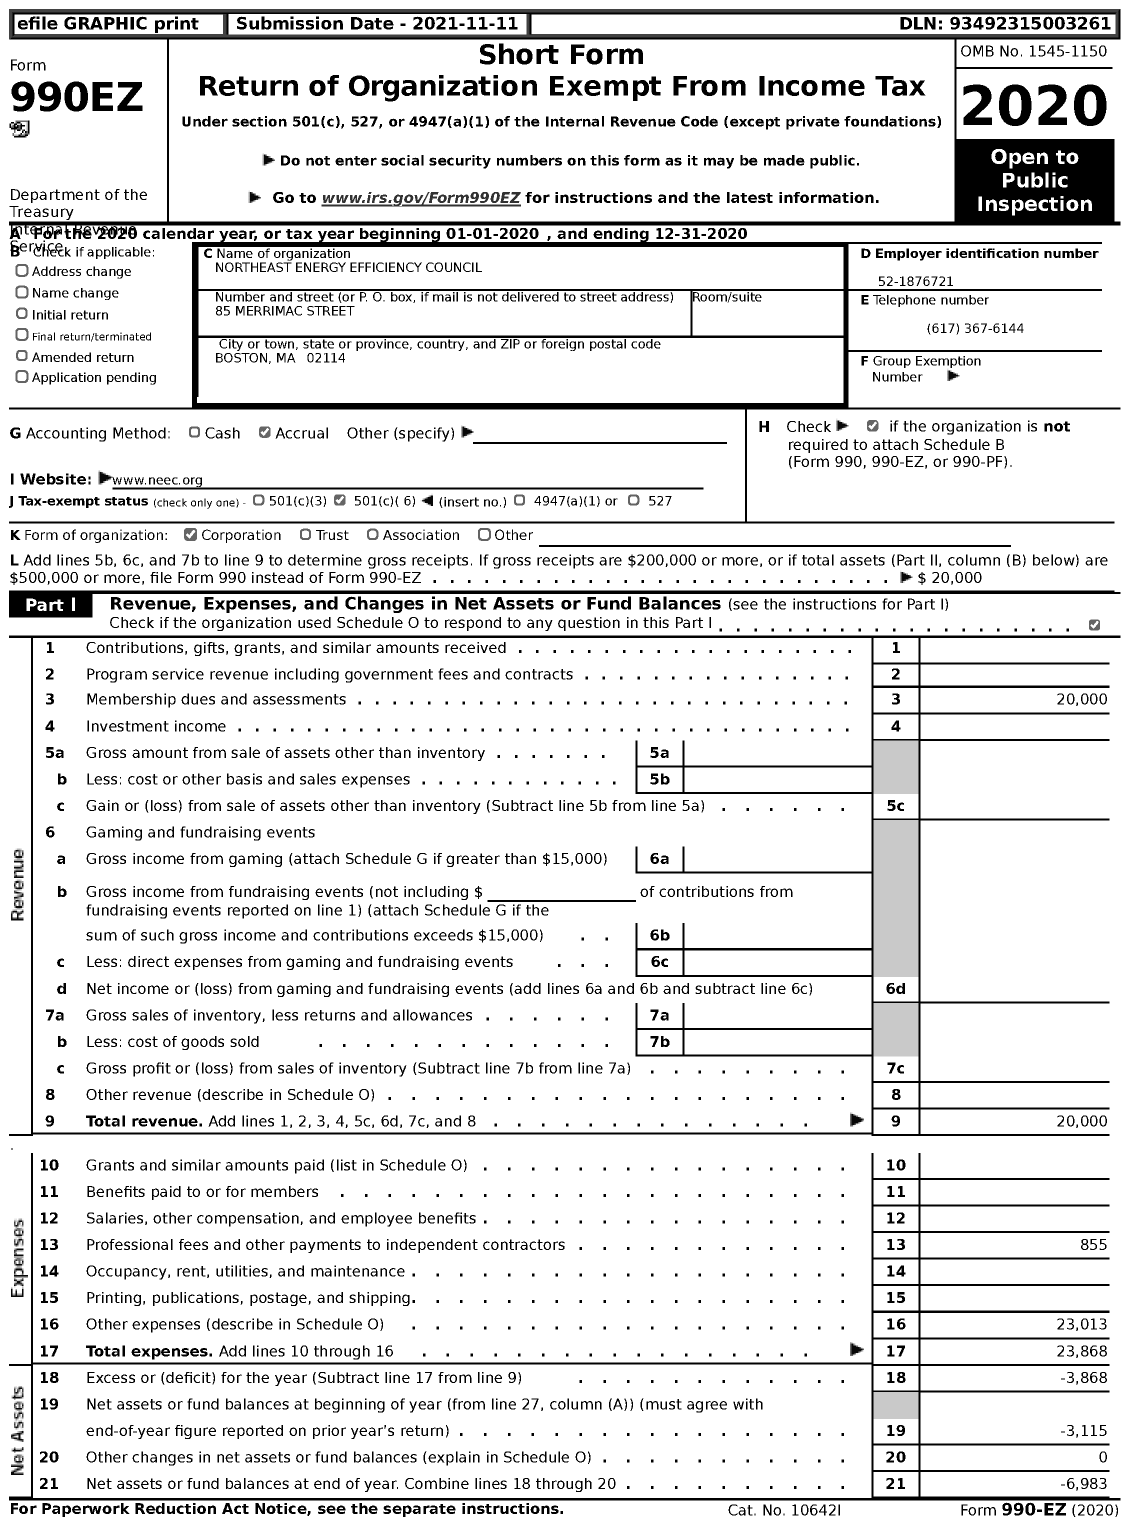 Image of first page of 2020 Form 990EZ for Northeast Energy Efficiency Council